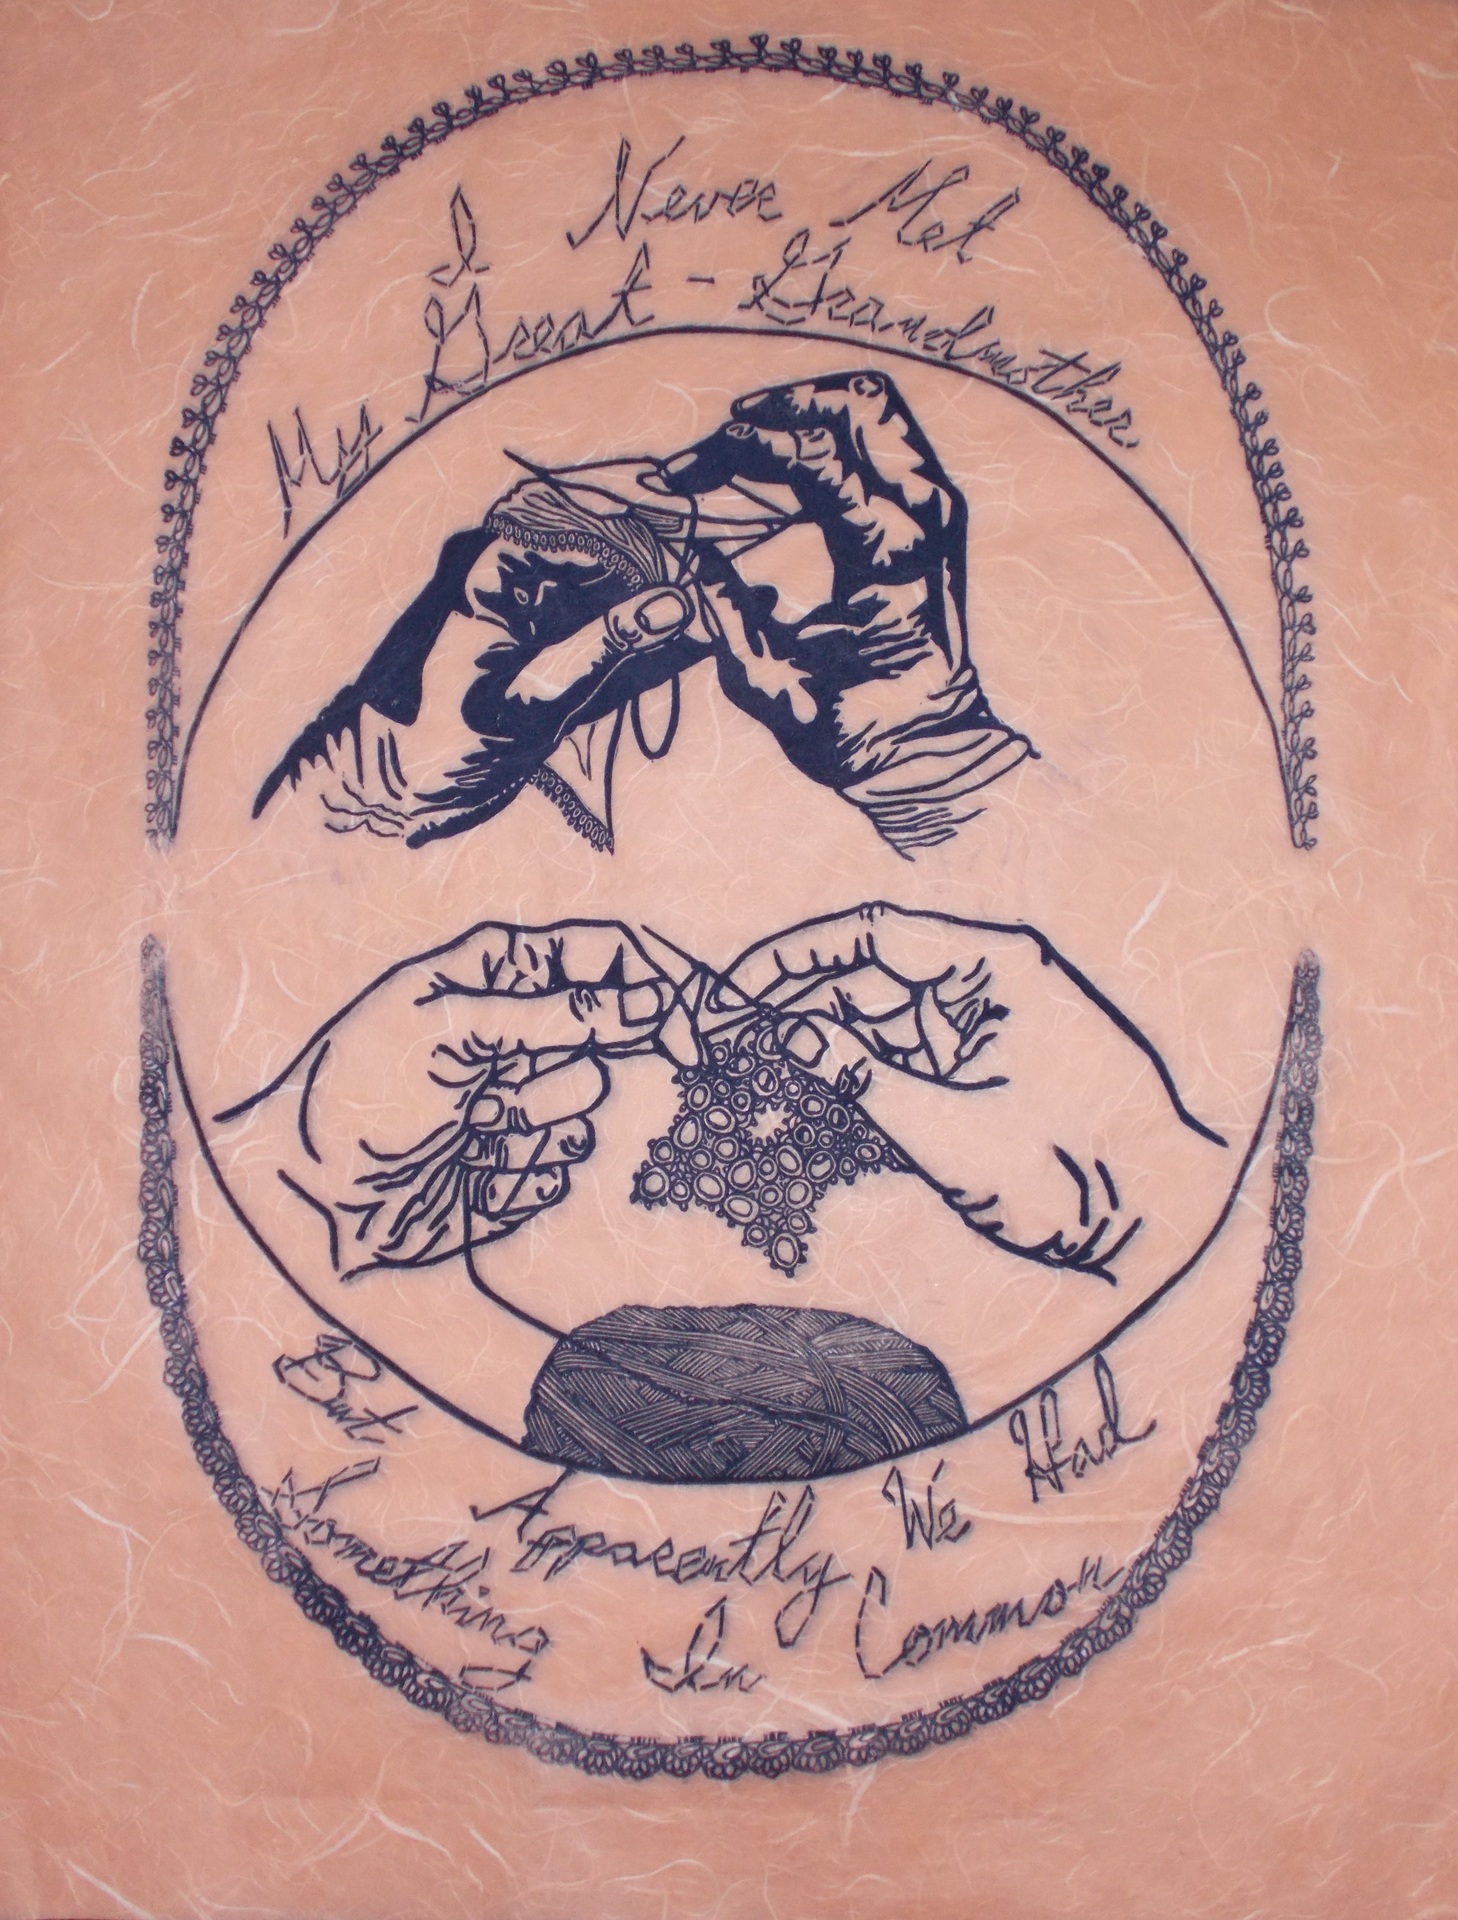 Rebecca Spilecki relief print depicting two close up sets of hands sewing and doing crochet that represent a span of generations. The text reads: “I never met my great grandmother, but apparently we had something in common.”